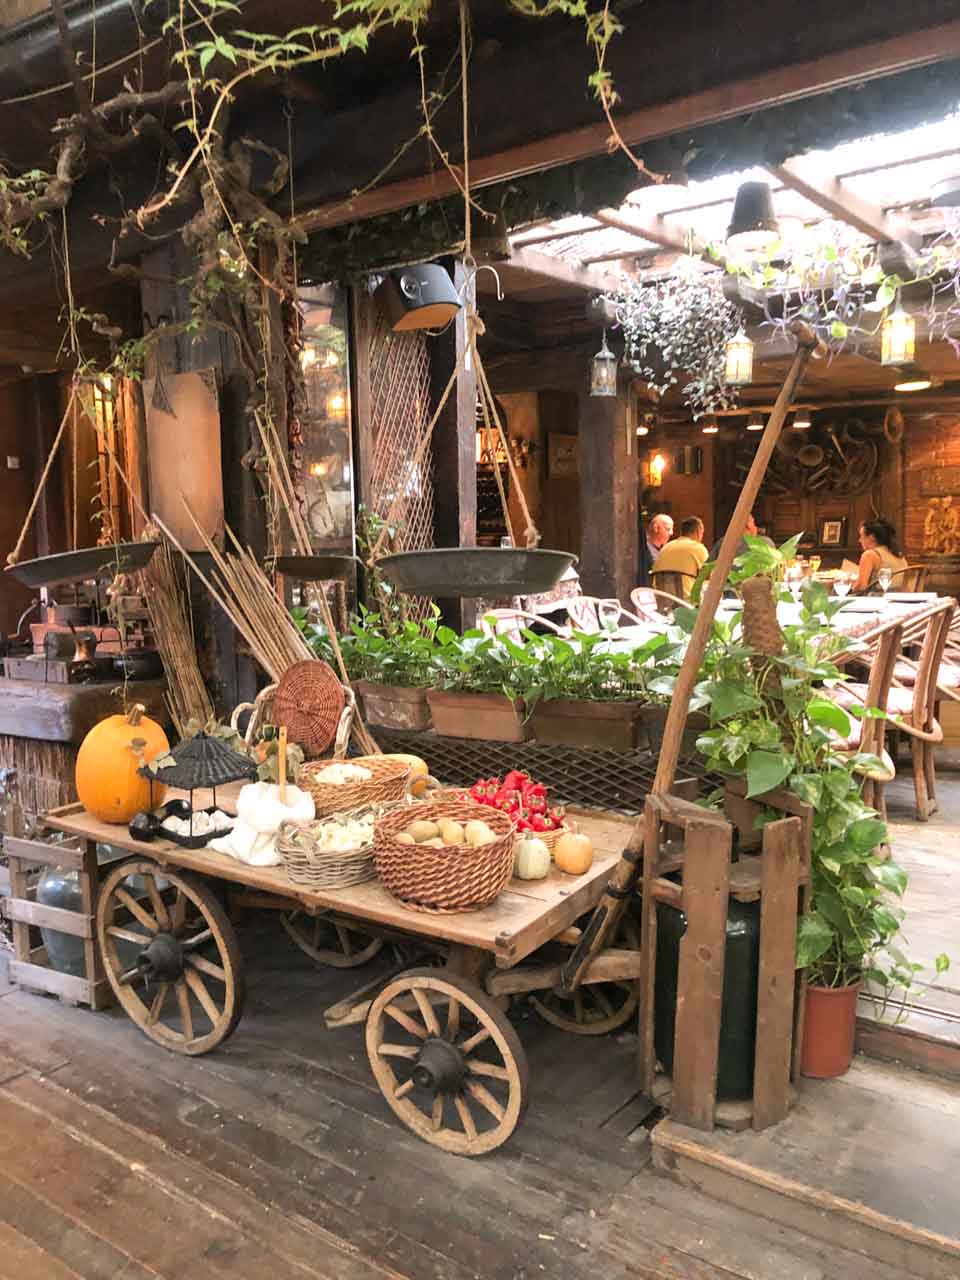 Wooden cart with different autumn decorations inside Liburnia Restaurant in Pristina, Kosovo